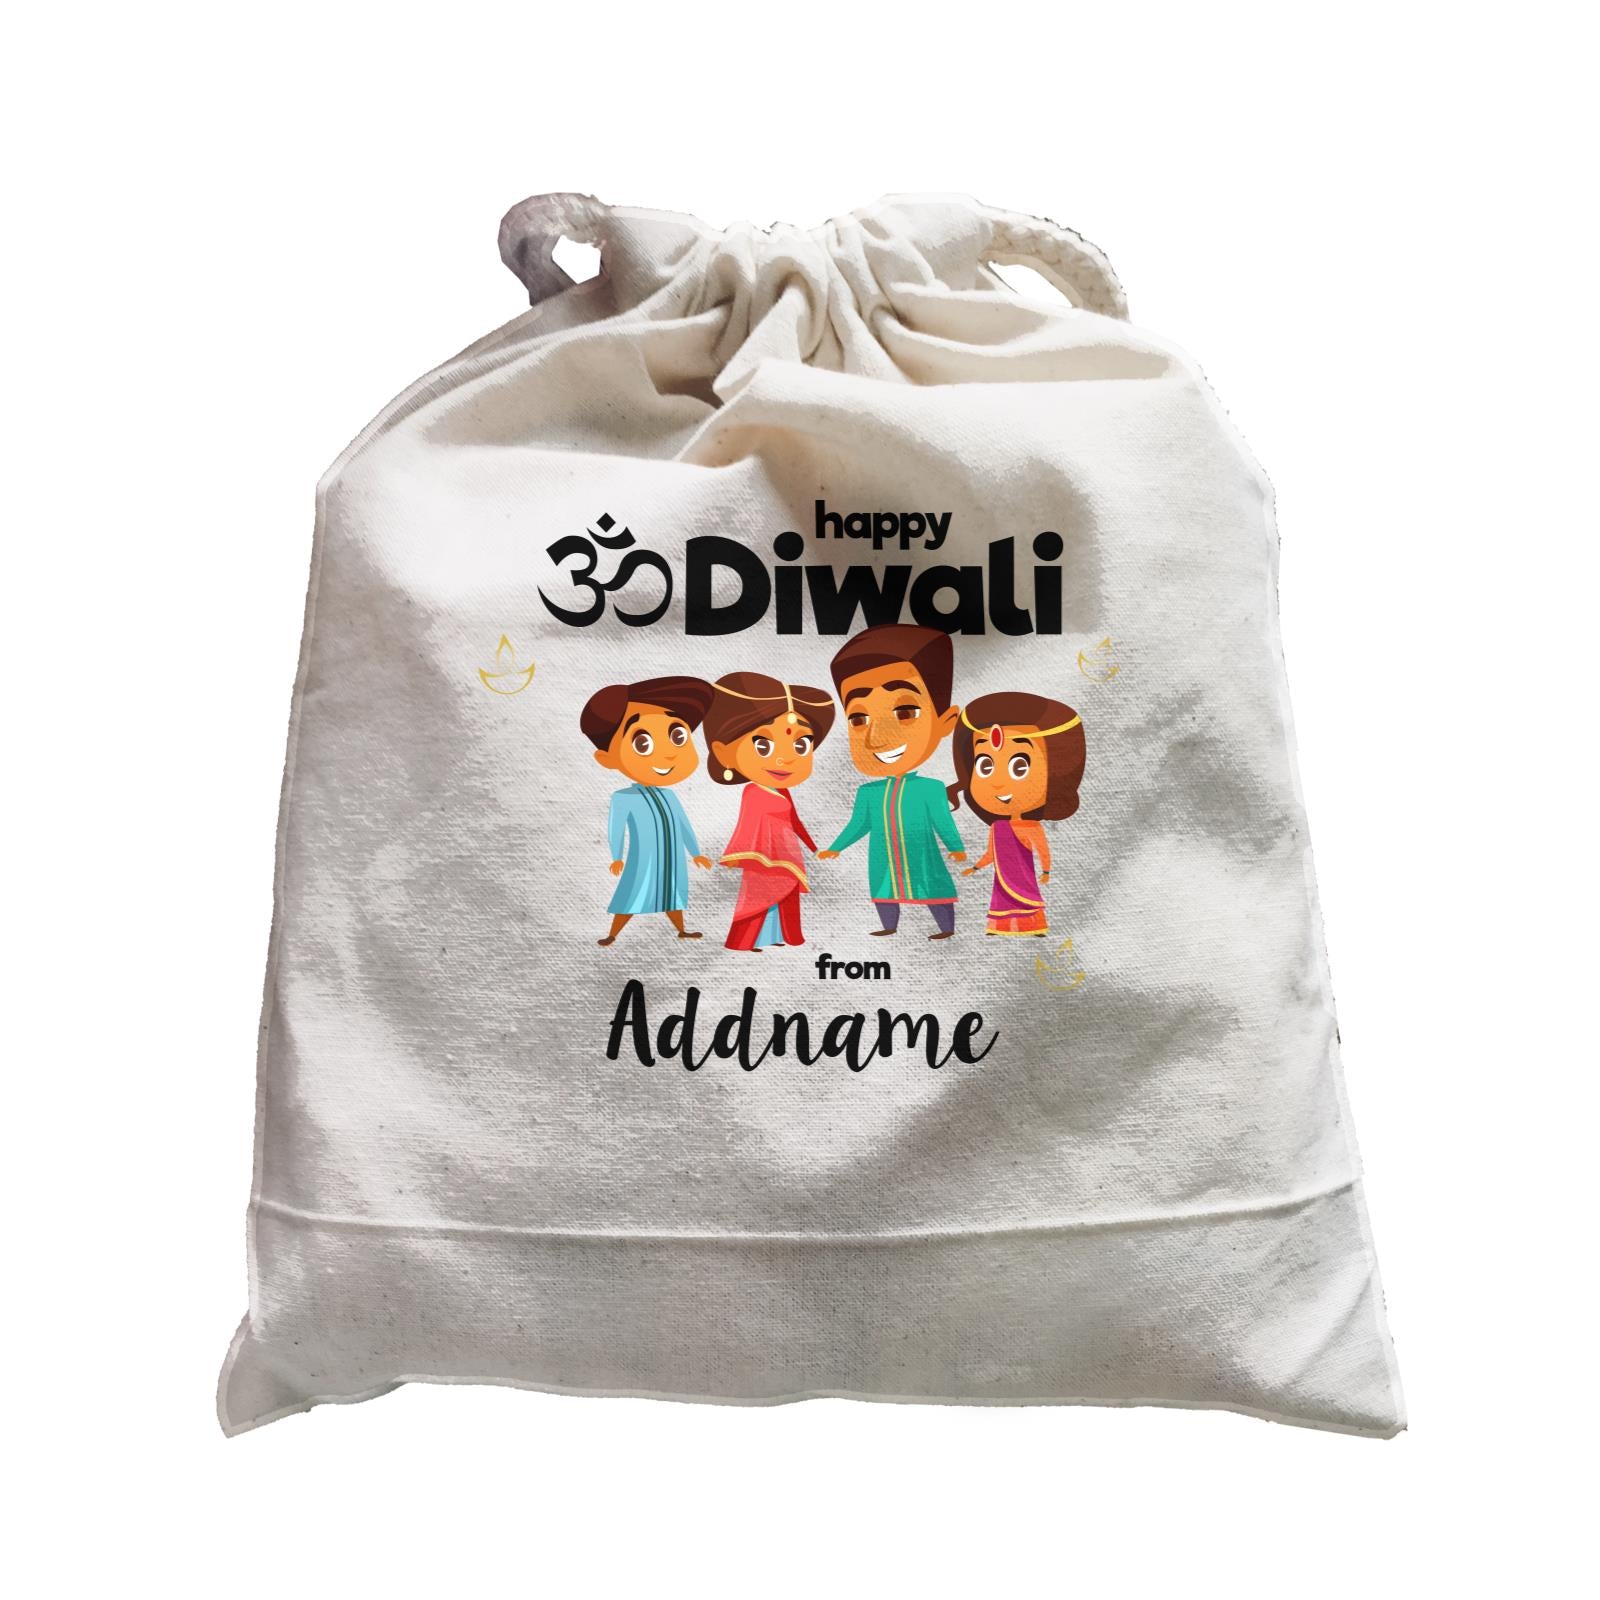 Cute Family Of Four OM Happy Diwali From Addname Satchel